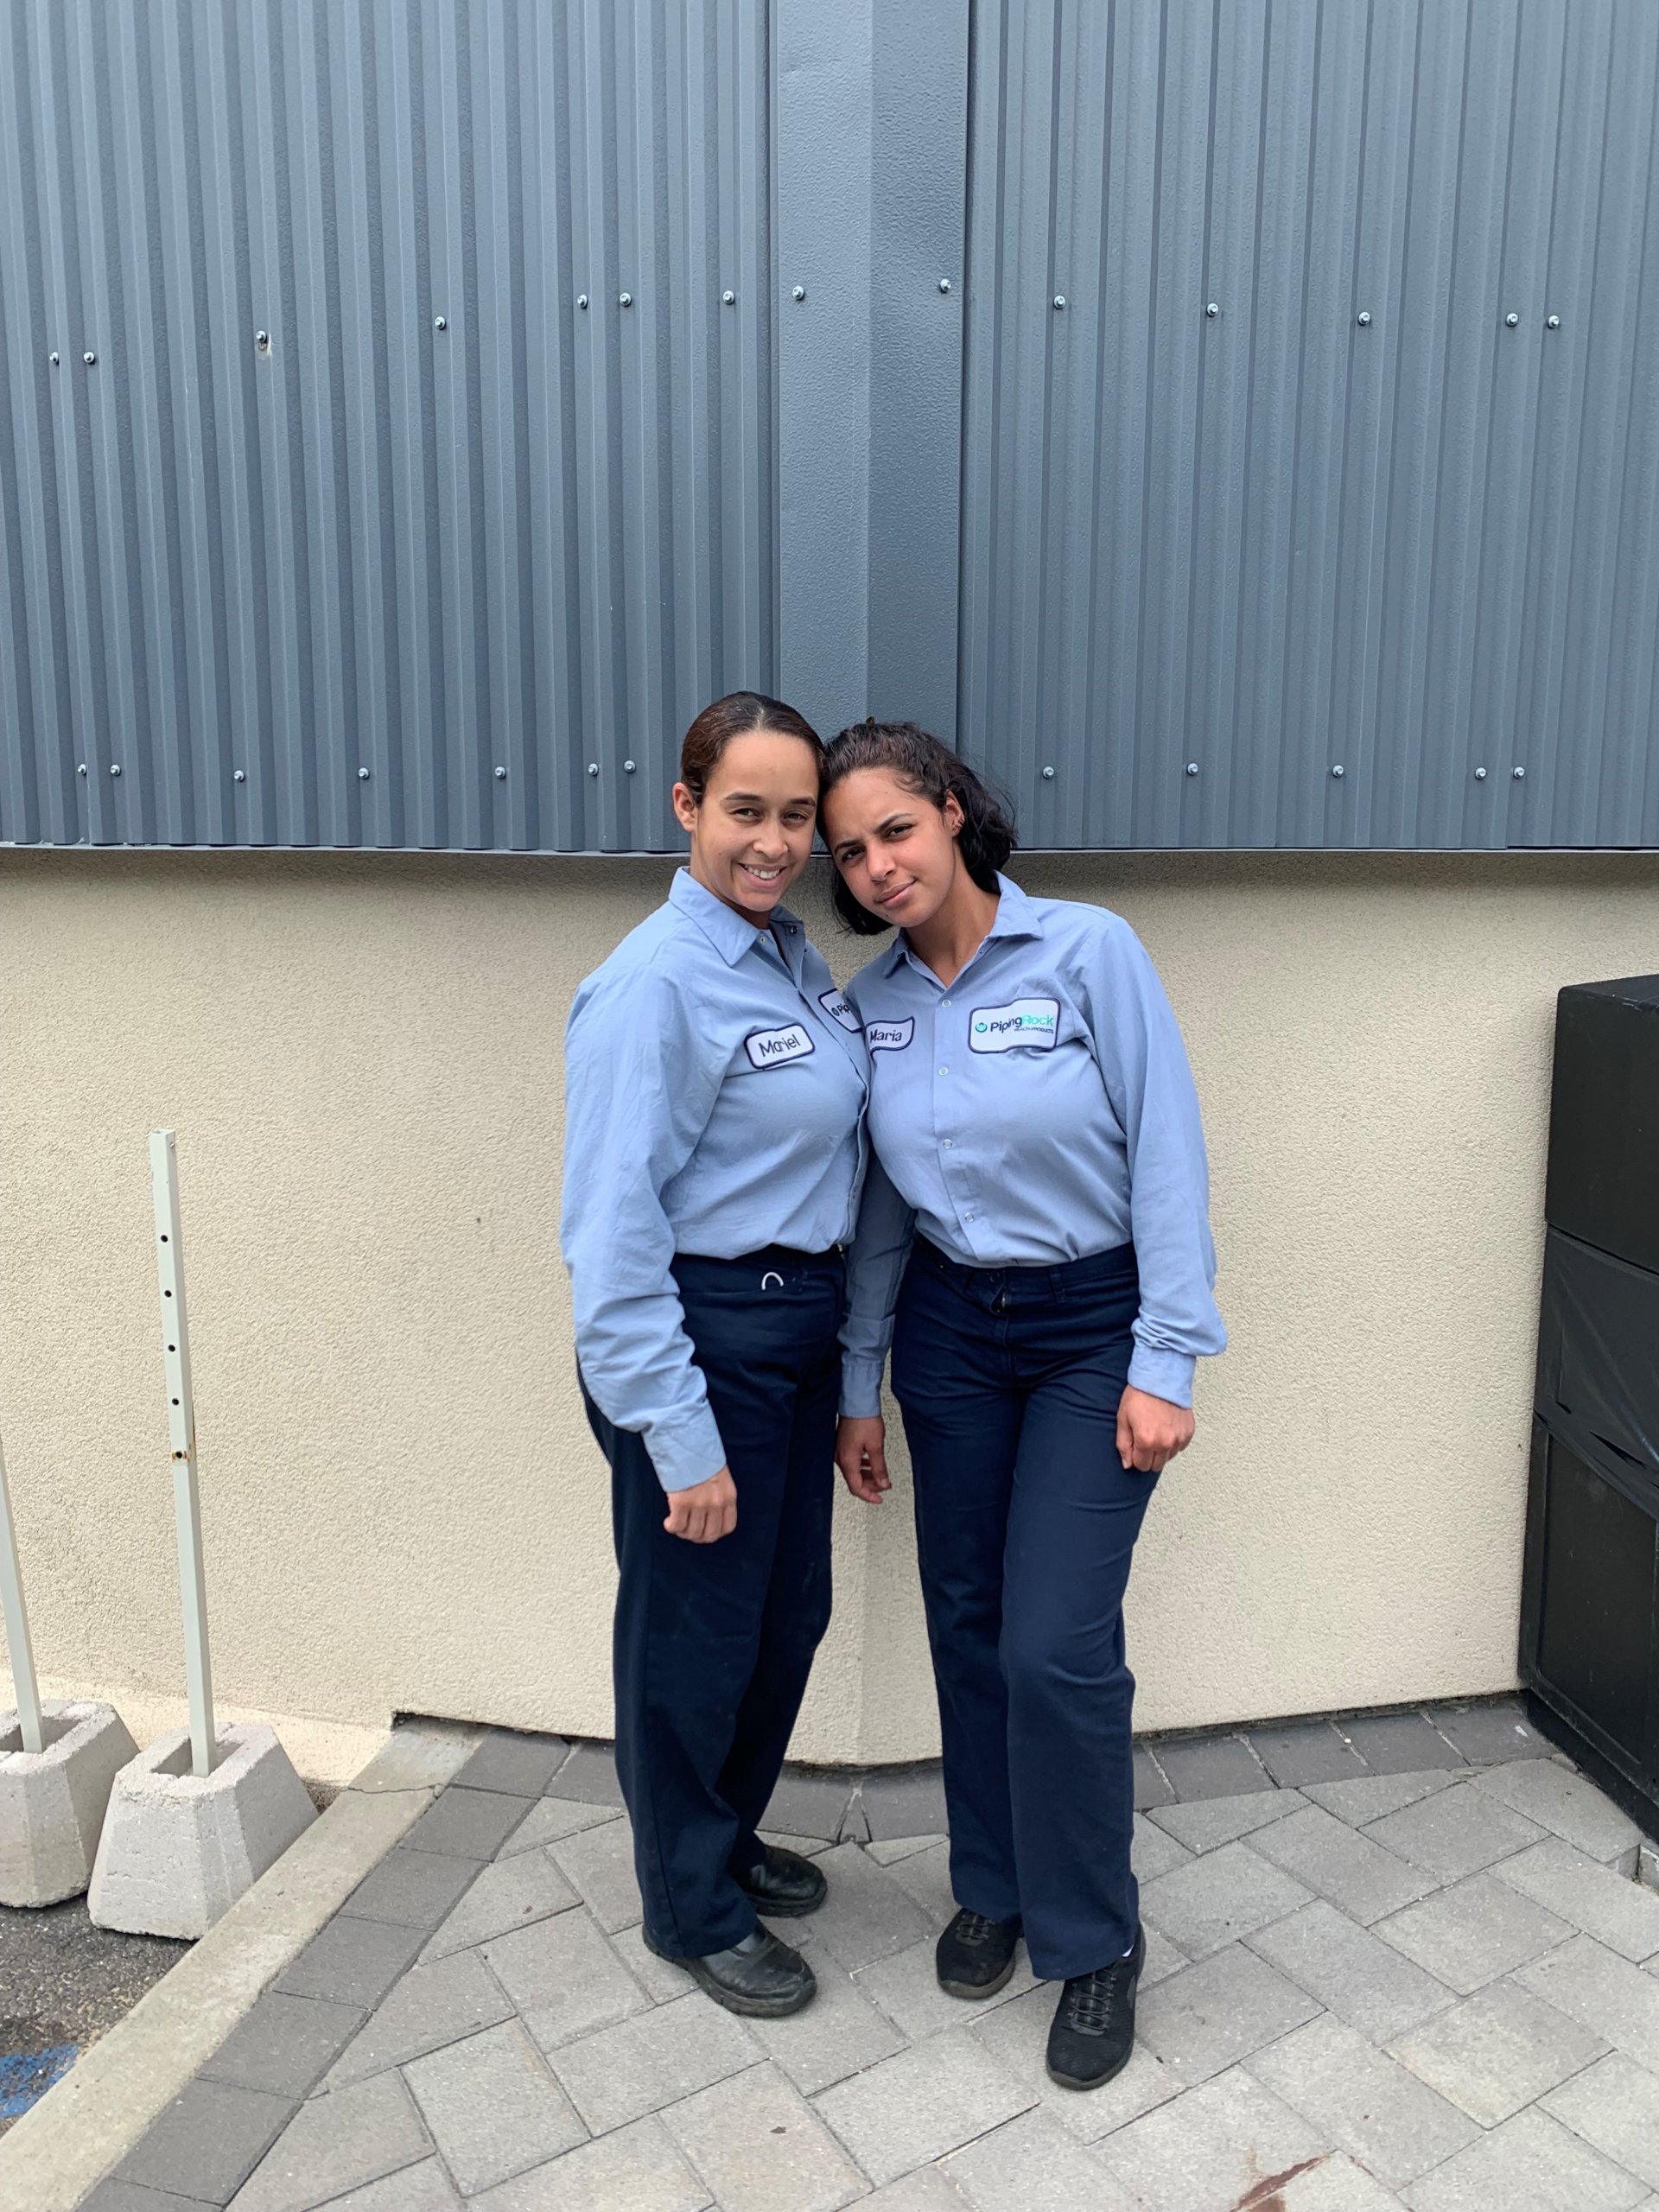 Mariel Rodriguez and Maria Marte Cepin, associates at Piping Rock, say they feel well supported by the company.